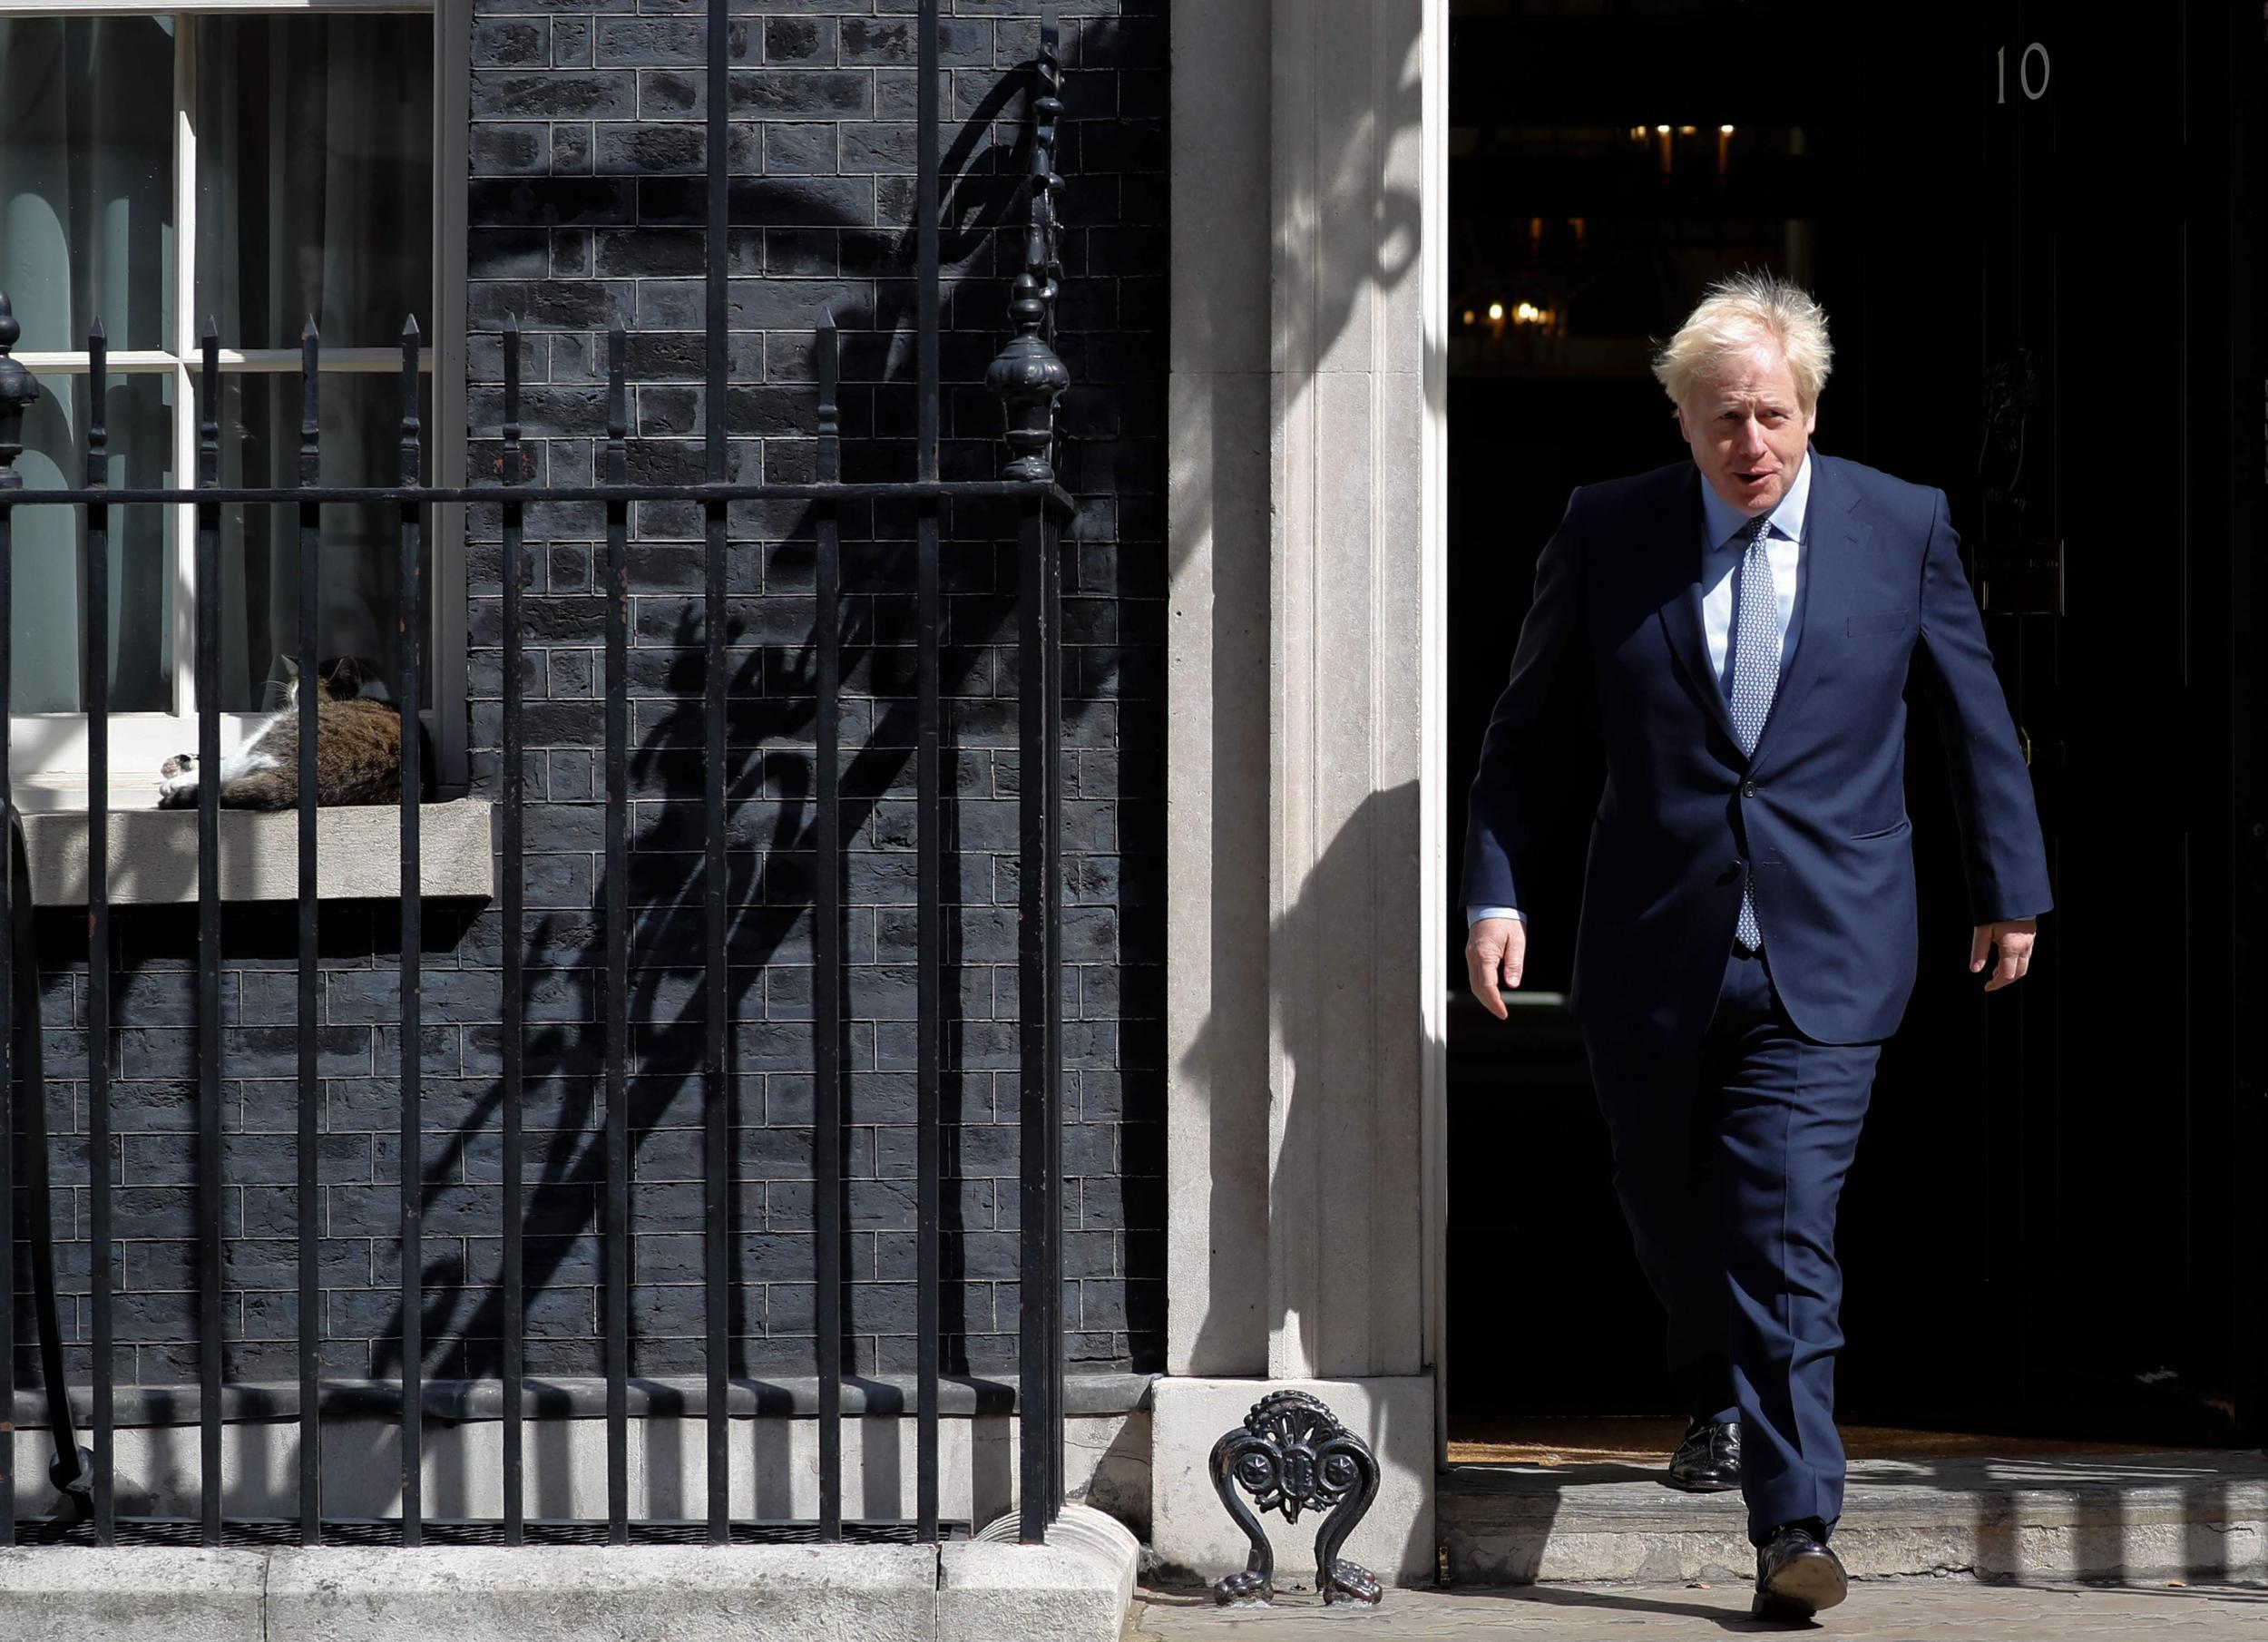 Should Johnson be forced out of No 10 after 31 October, could parliament pass retrospective legislation to delay or even cancel Brexit?